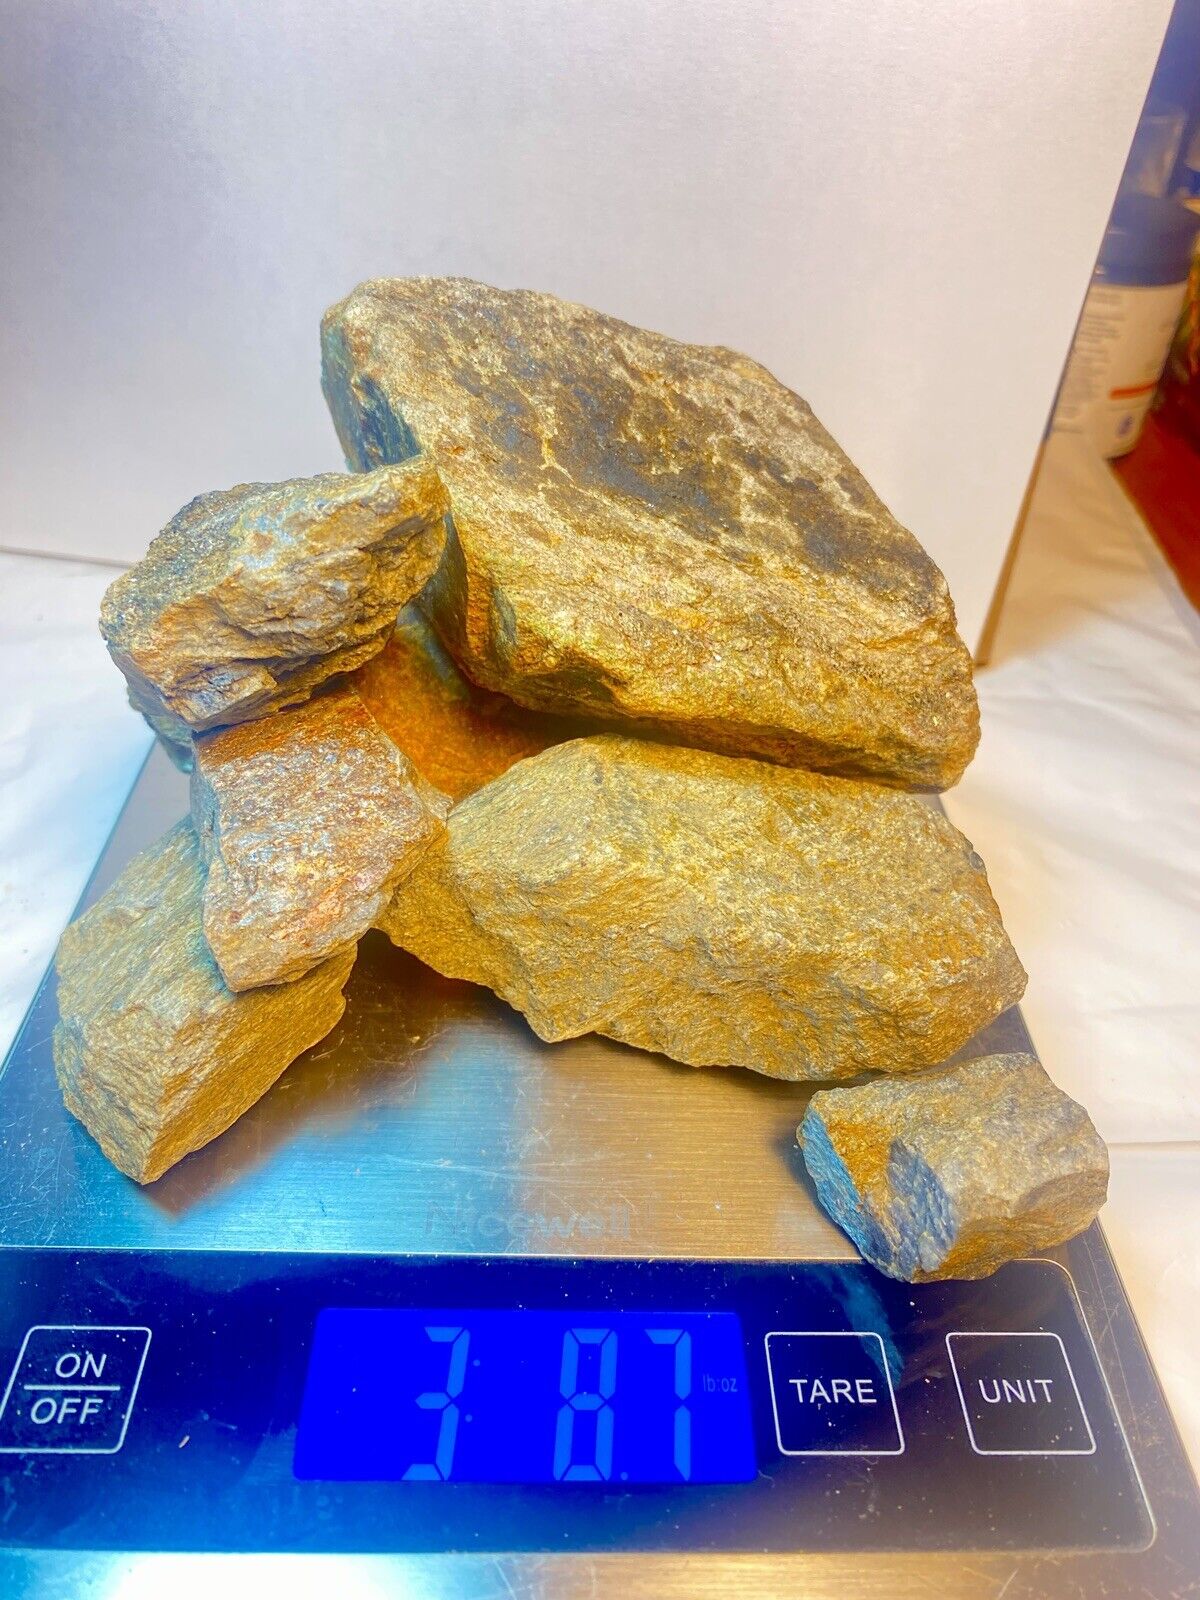 Gold Ore Quartz With Tons Of Metal Content Super Mineralization Sulfides 3.8lbs